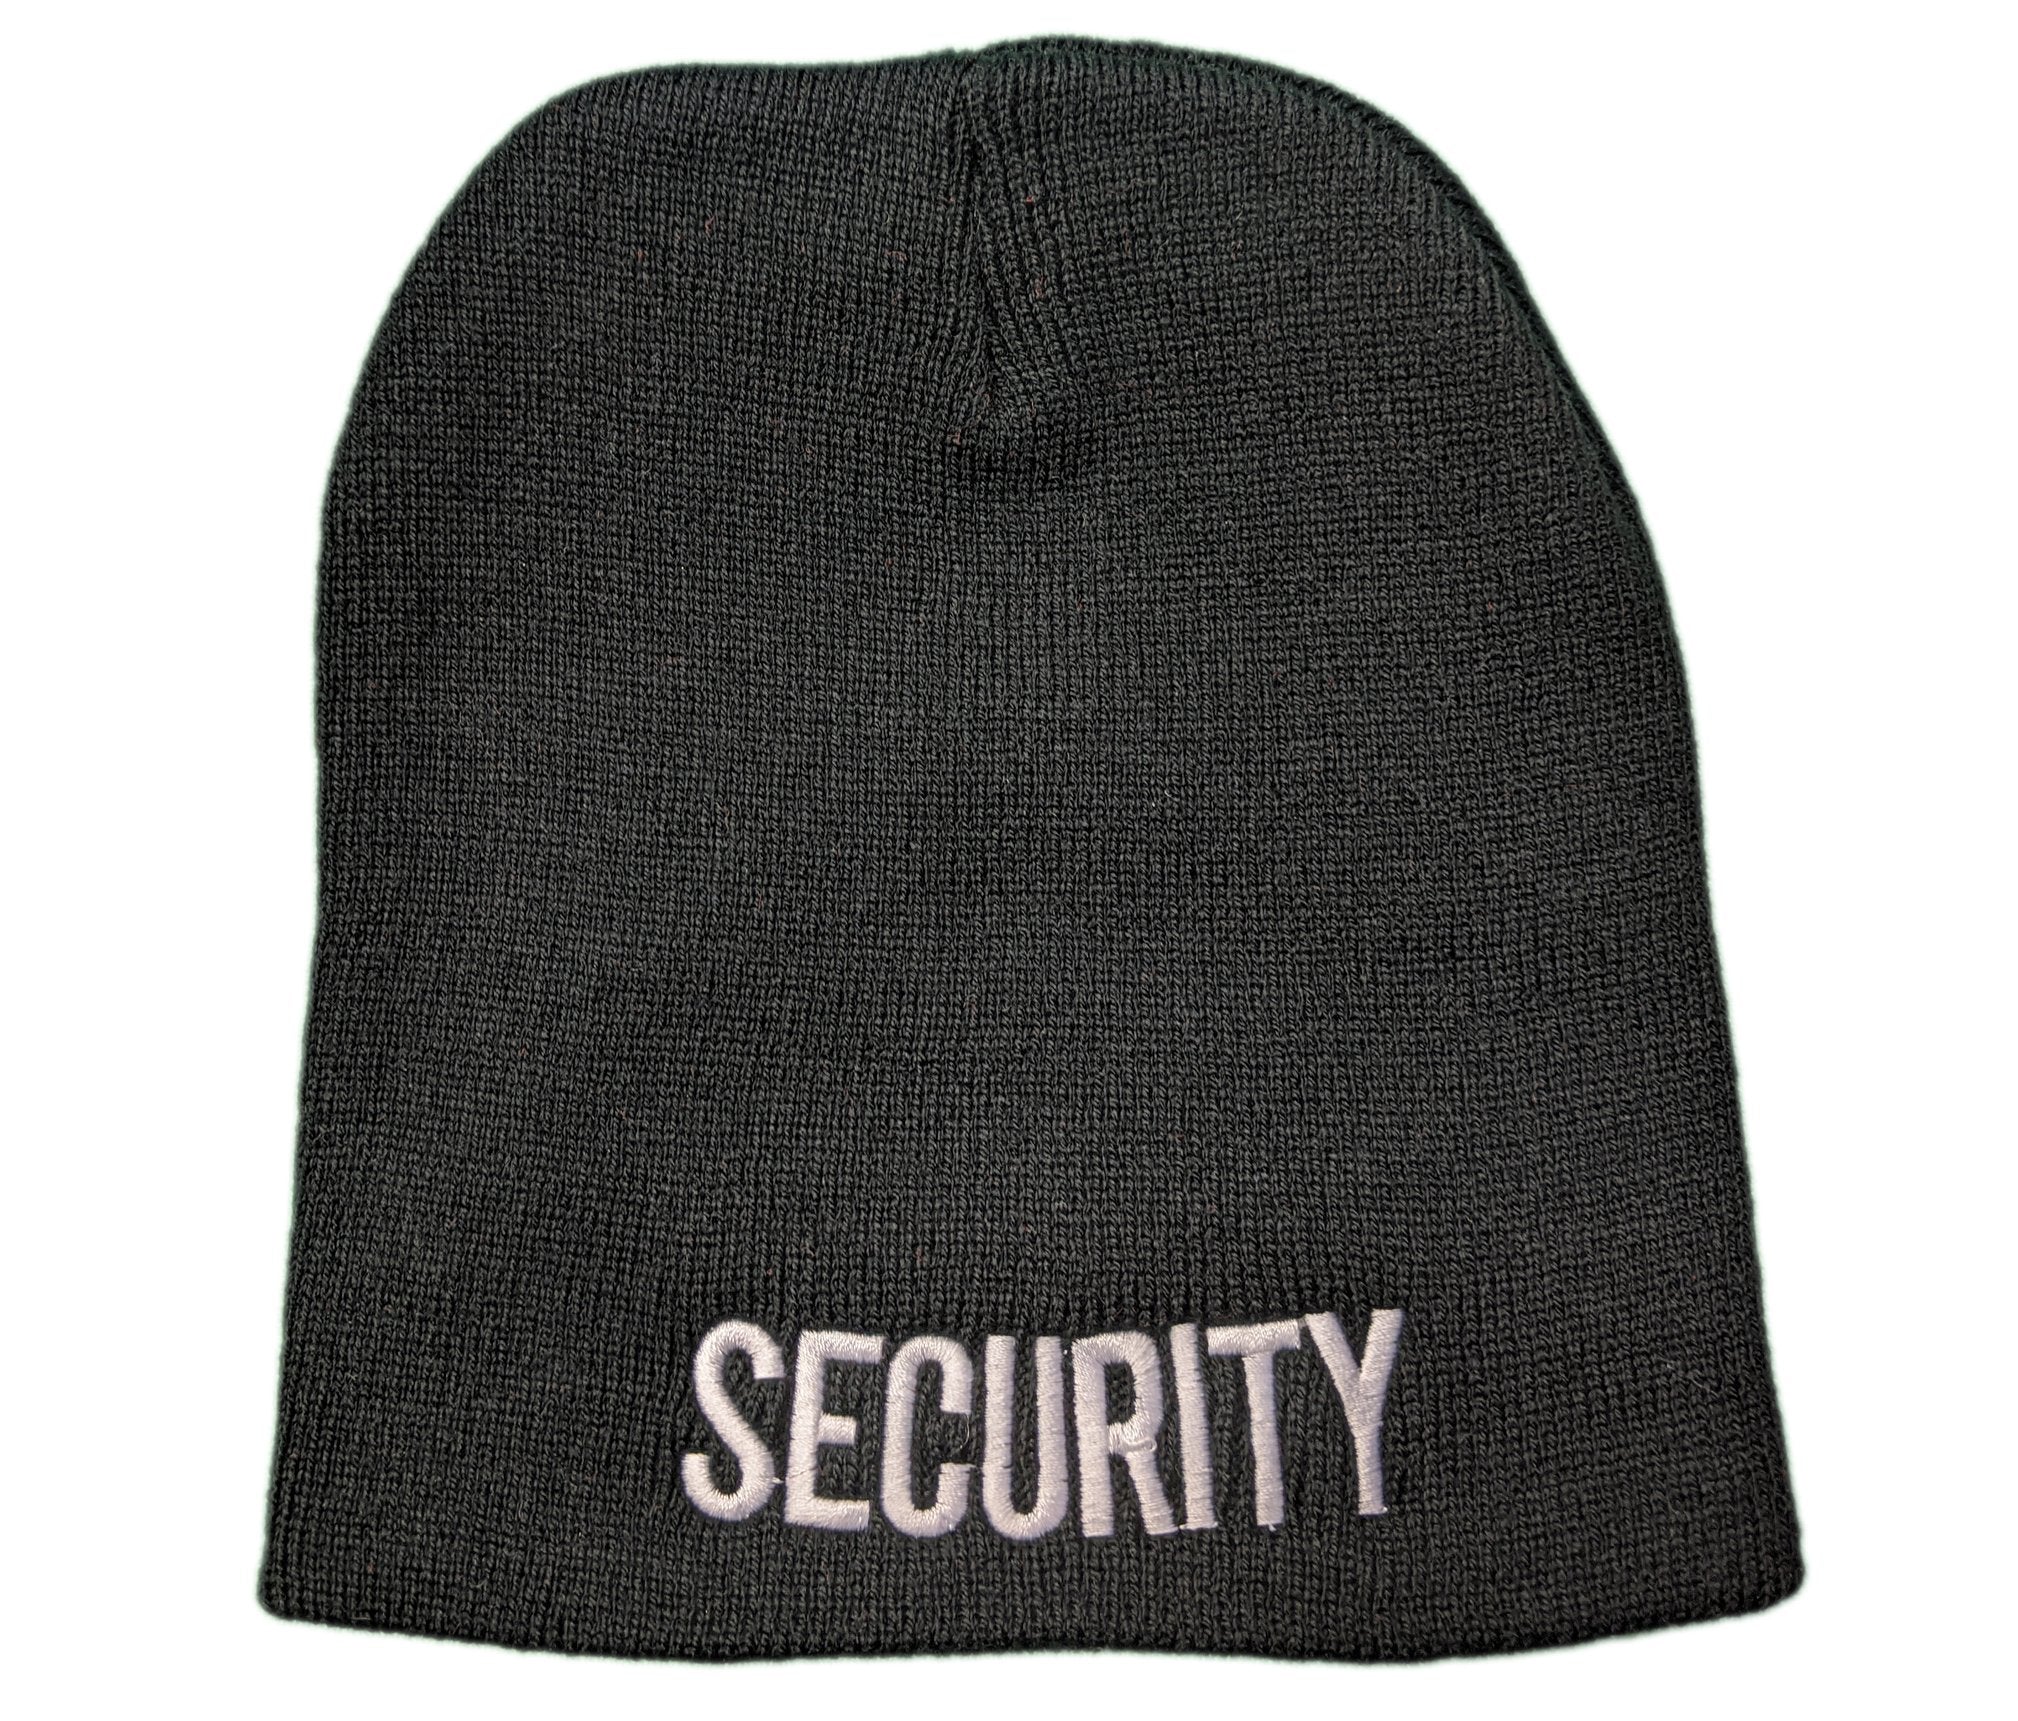 NYC Factory Men's Security Knit Cap Beanie USA Embroidered Winter Hat